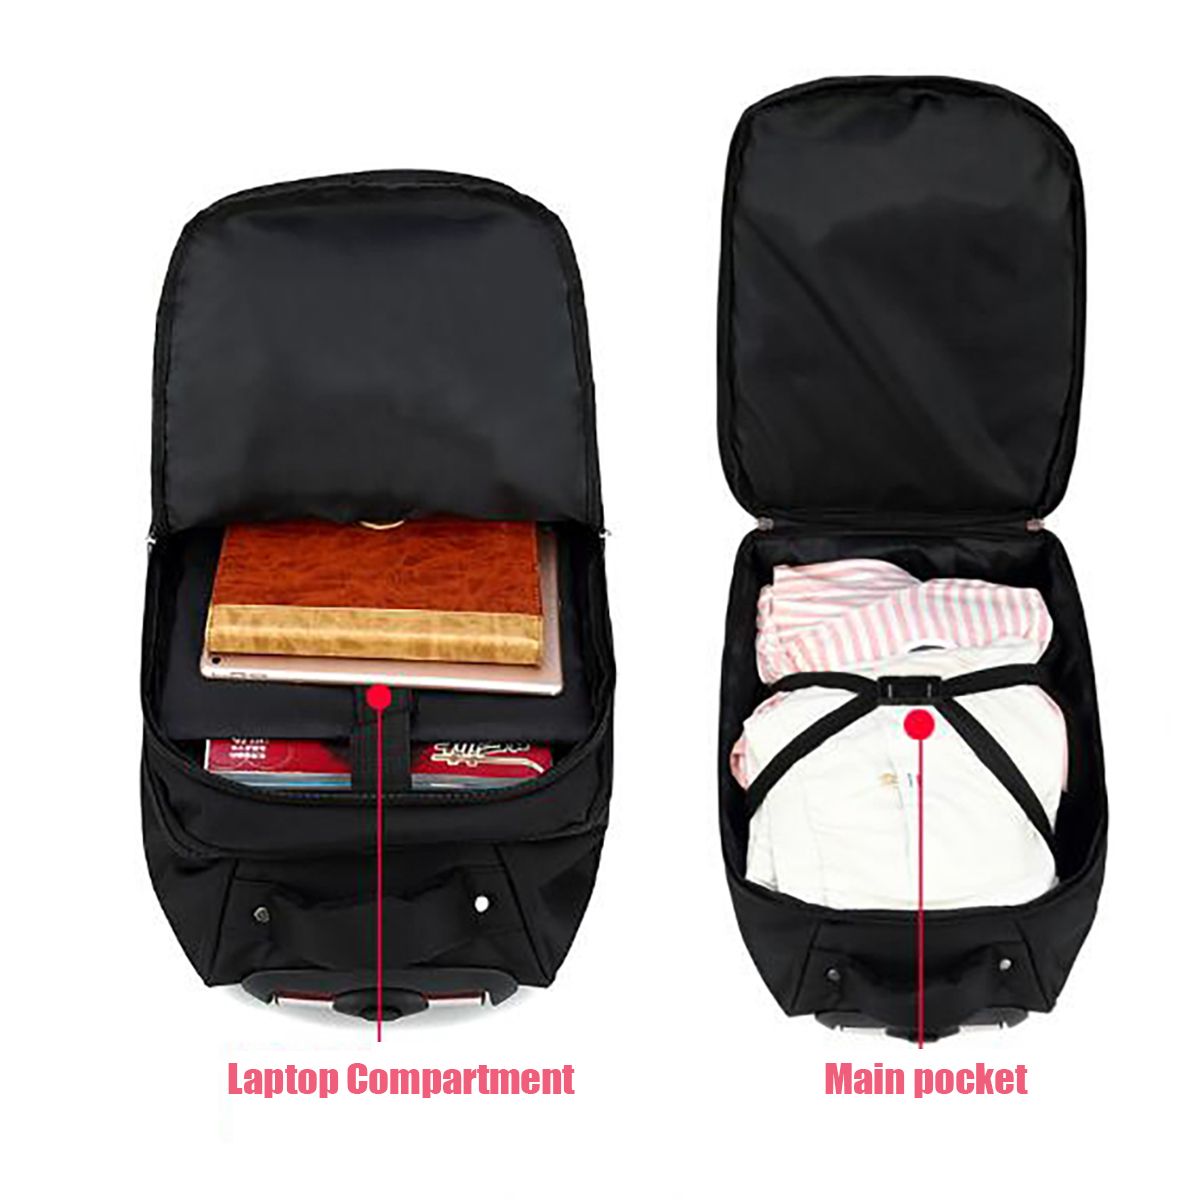 Travel-Bag-18-inch-Rolling-Shoulders-Backpack-Trolley-Luggage-Suitcase-Large-Capacity-Cabin-Suitcase-1533684